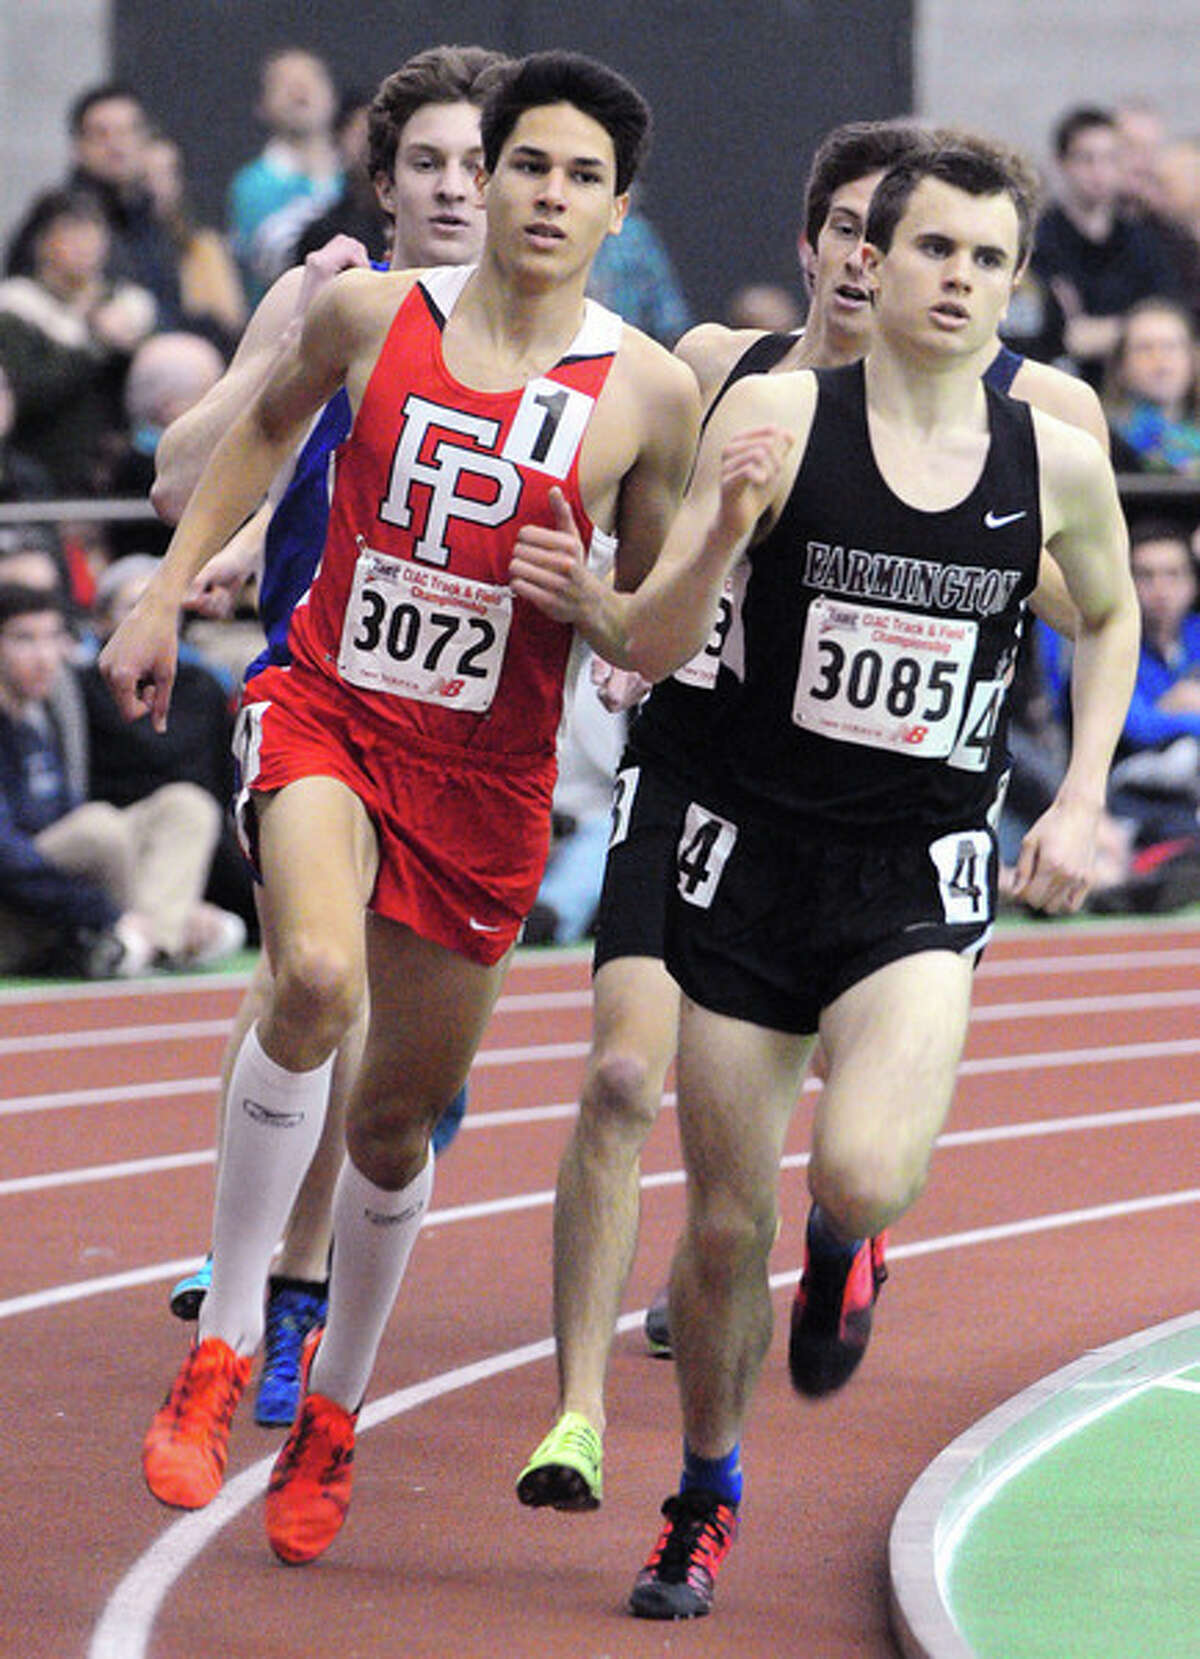 Chris Alvarado (left) of Fairfield Prep and Matt Chisholm (right) of Farmington are lead the pack in the 1600 meter run at the State Open in New Haven on 2/17/2014. Photo by Arnold Gold/New Haven Register